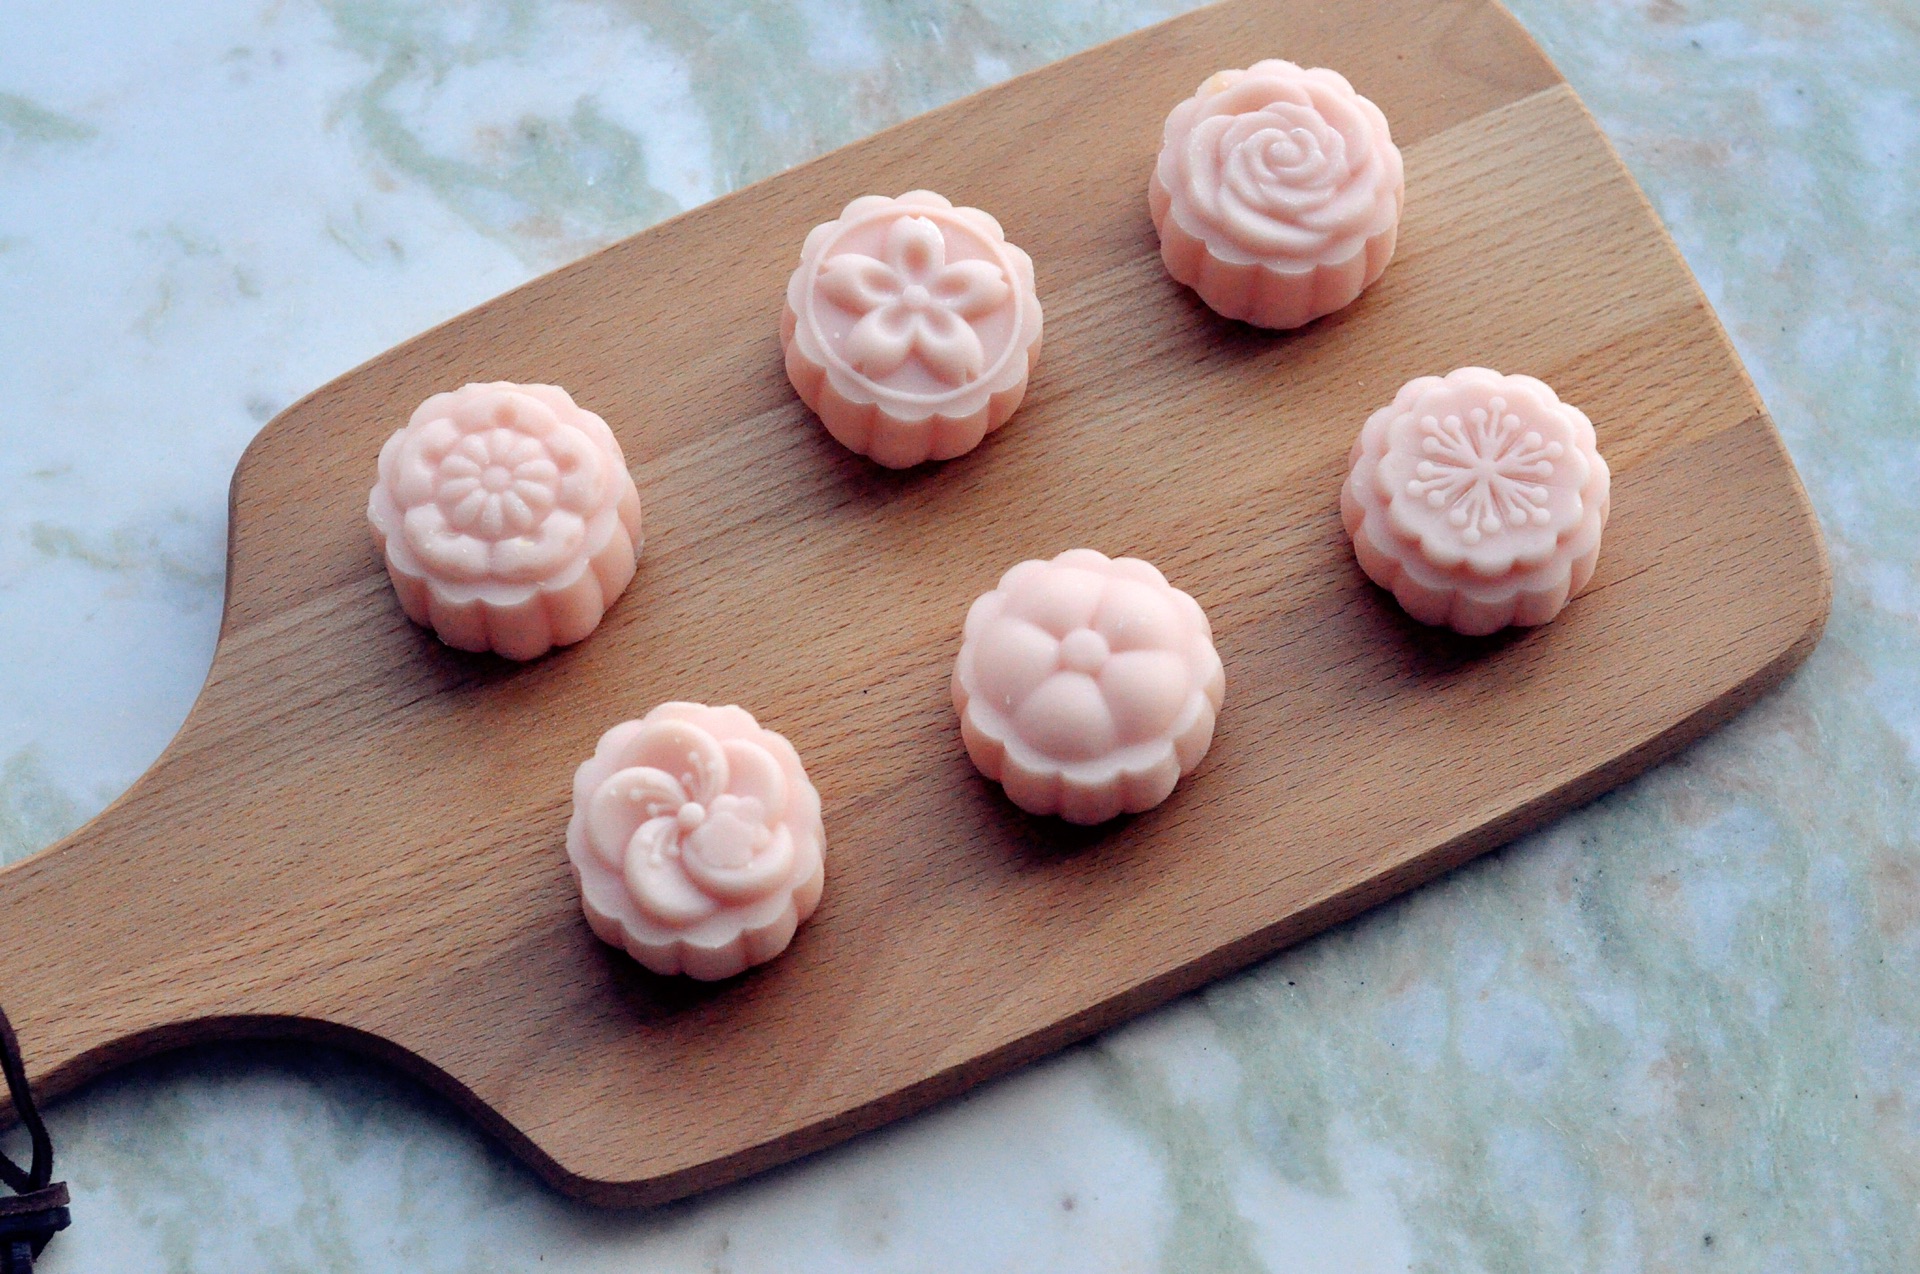 Ice moon cake with beautiful patterns